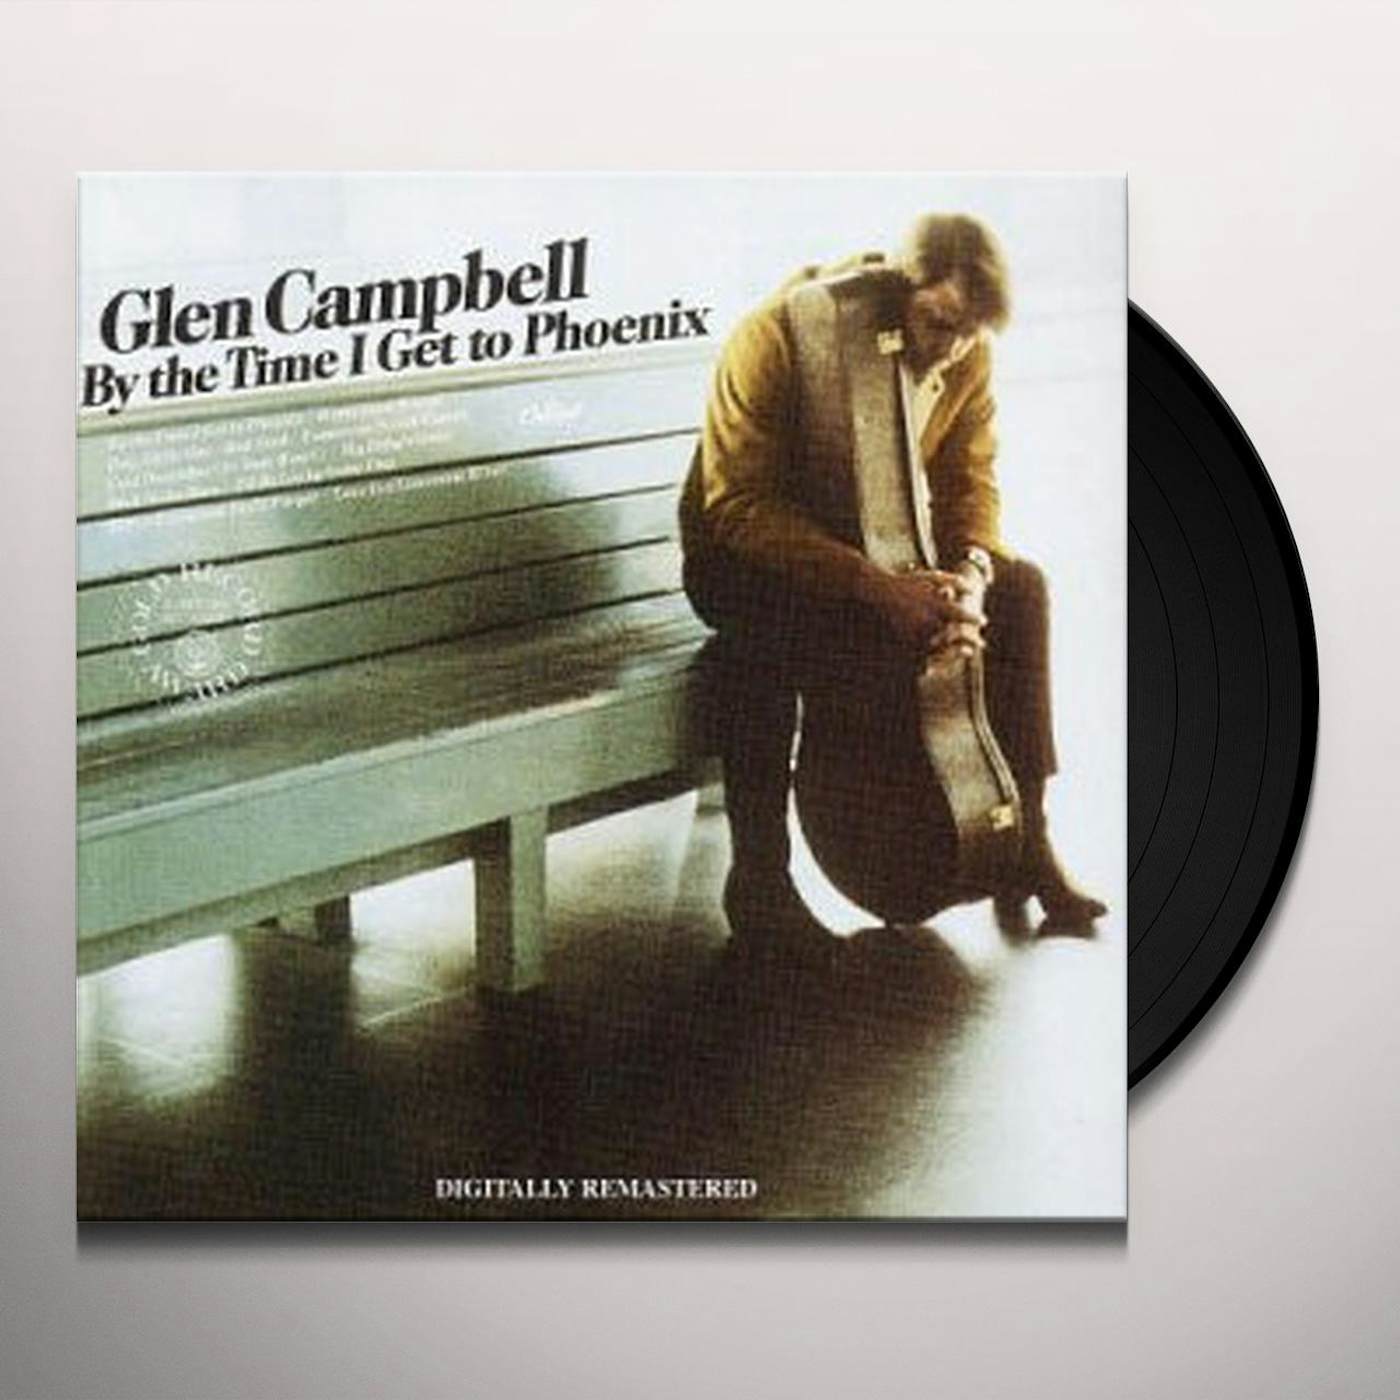 Glen Campbell BY TIME I GET TO PHOENIX Vinyl Record